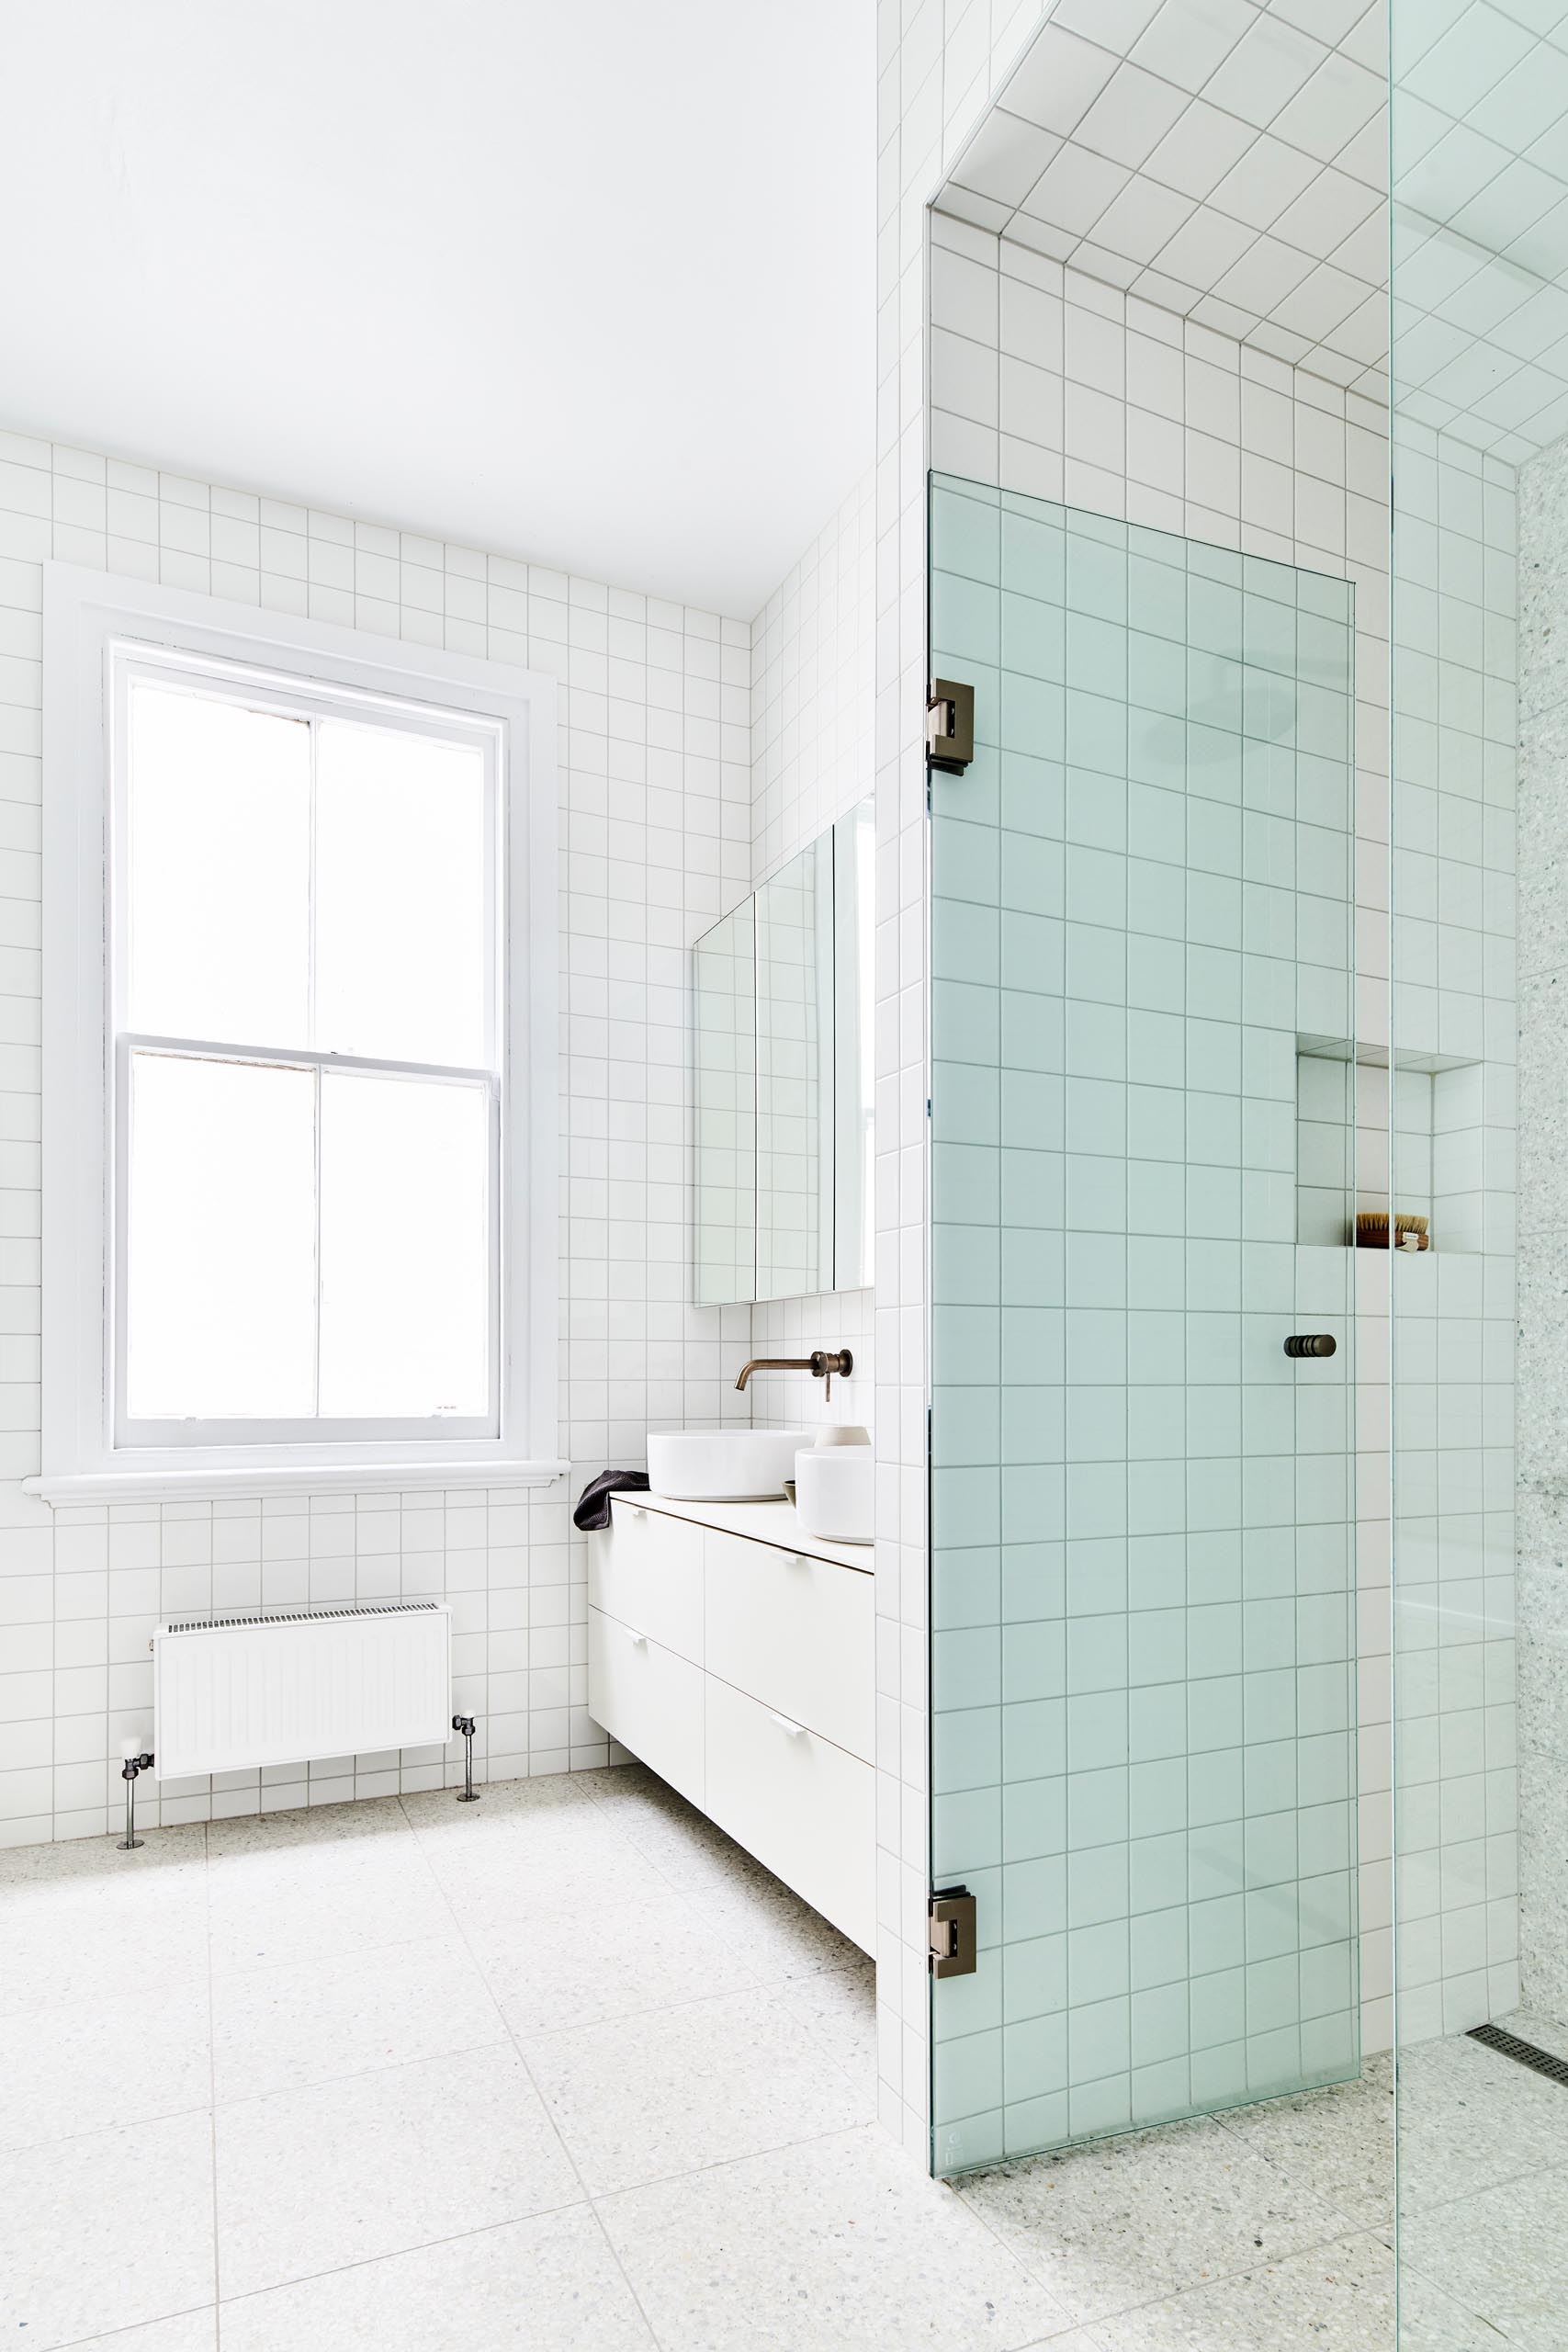 A modern white bathroom with square tiles.